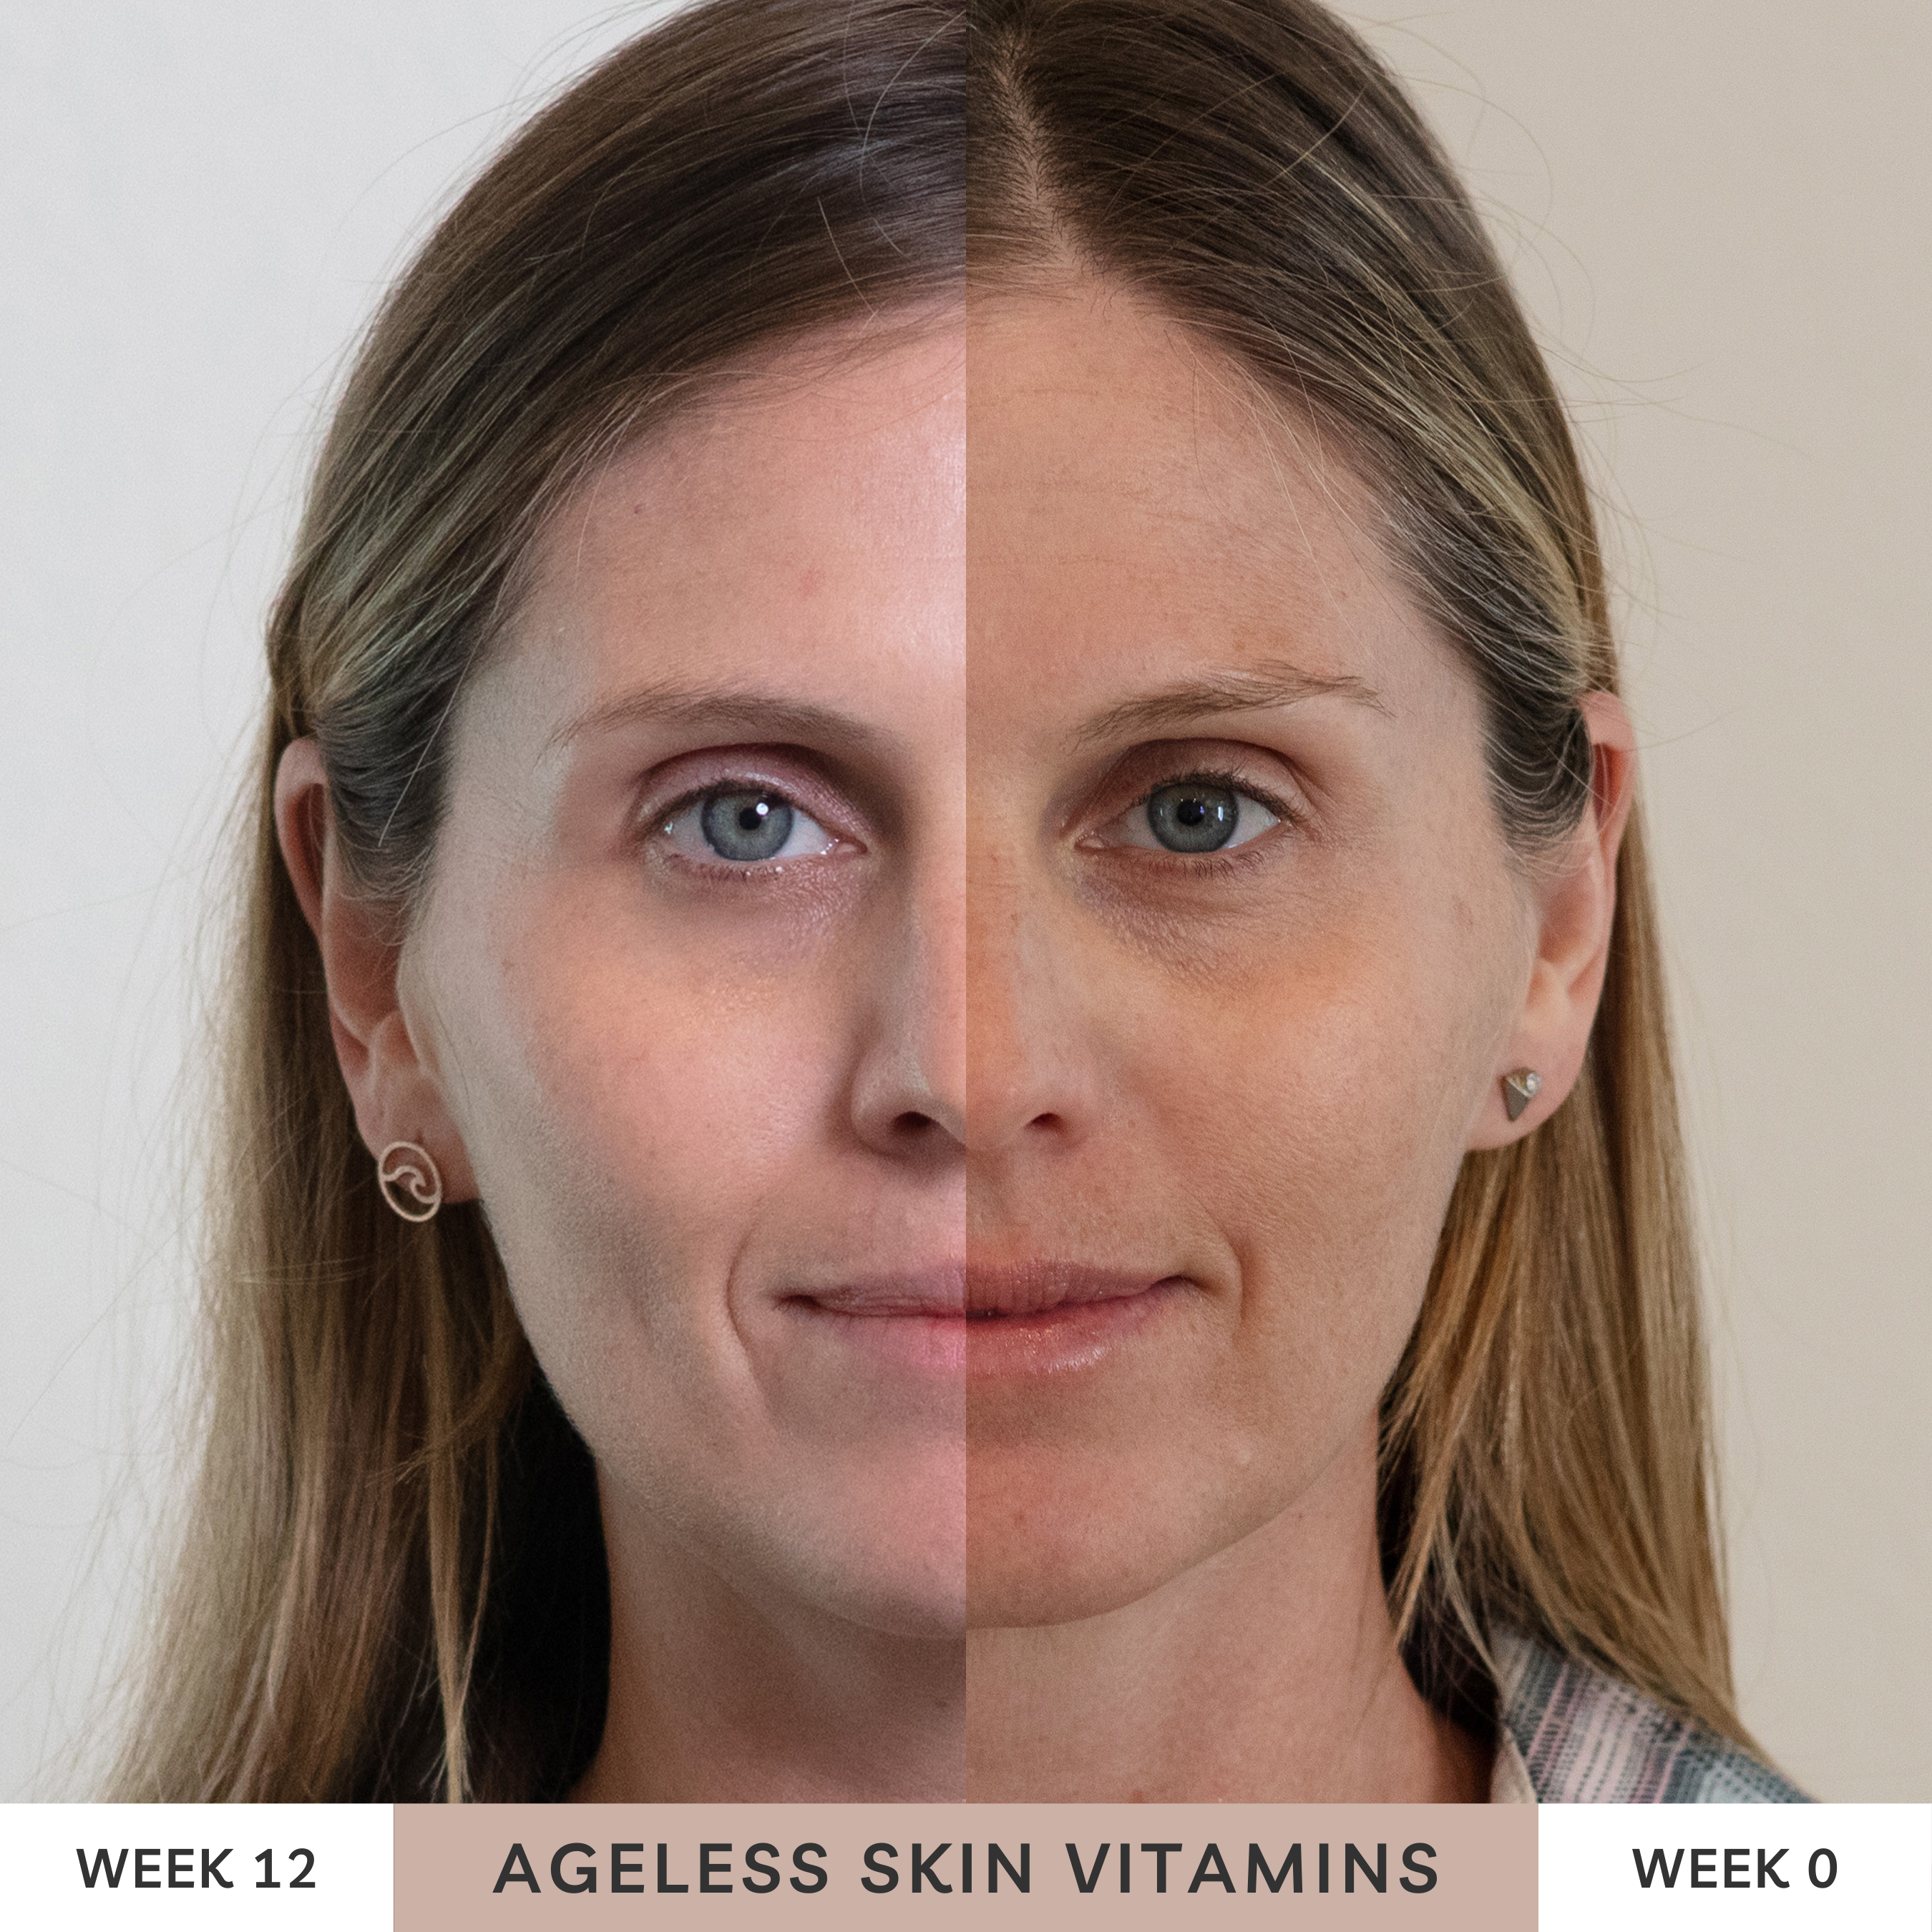 Real results for ageless skin vitamins